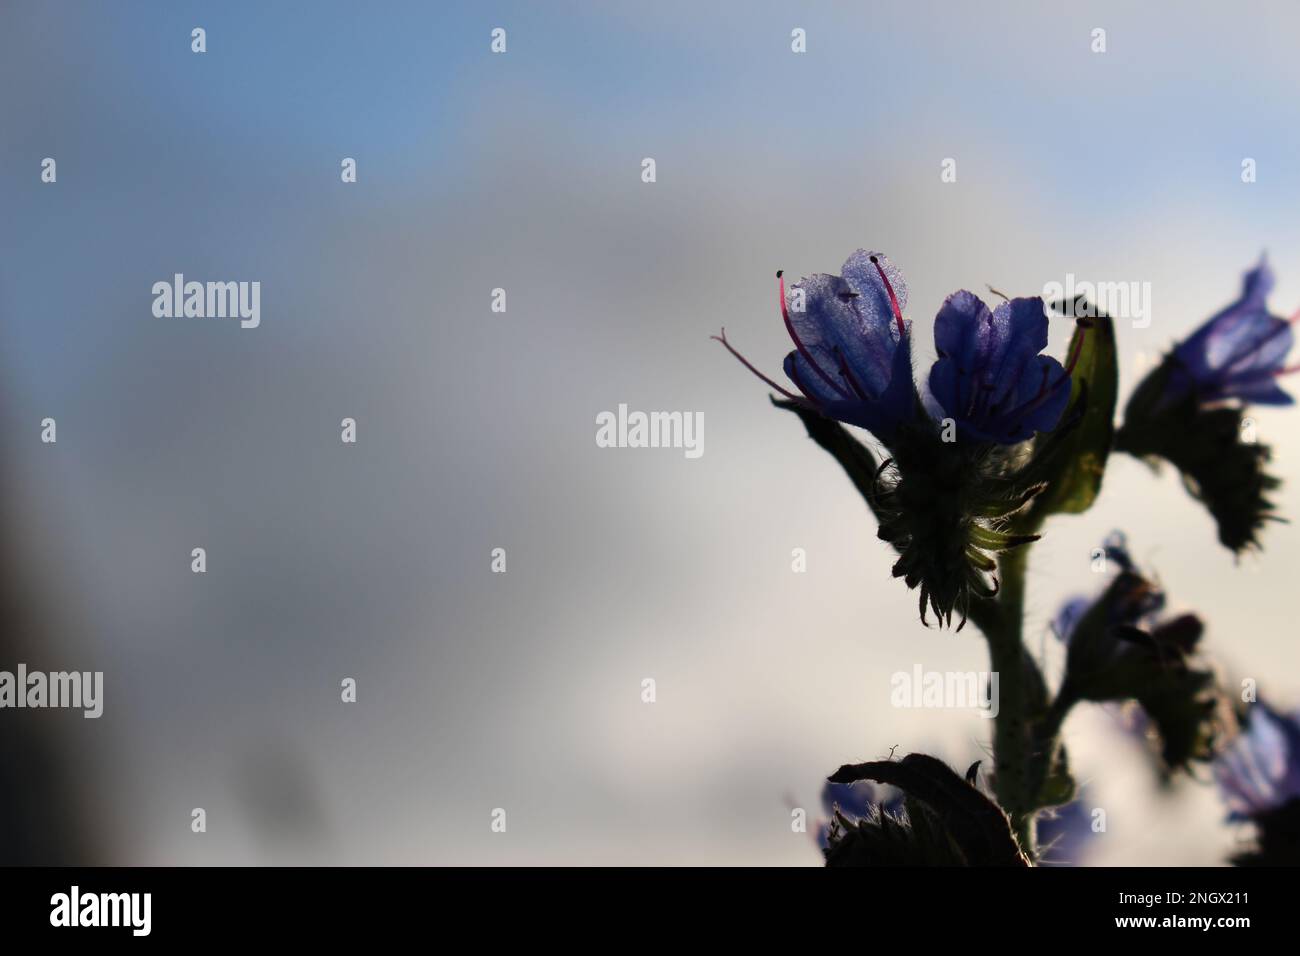 viper's bugloss (Echium vulgare) background at sunddown with copy space Stock Photo